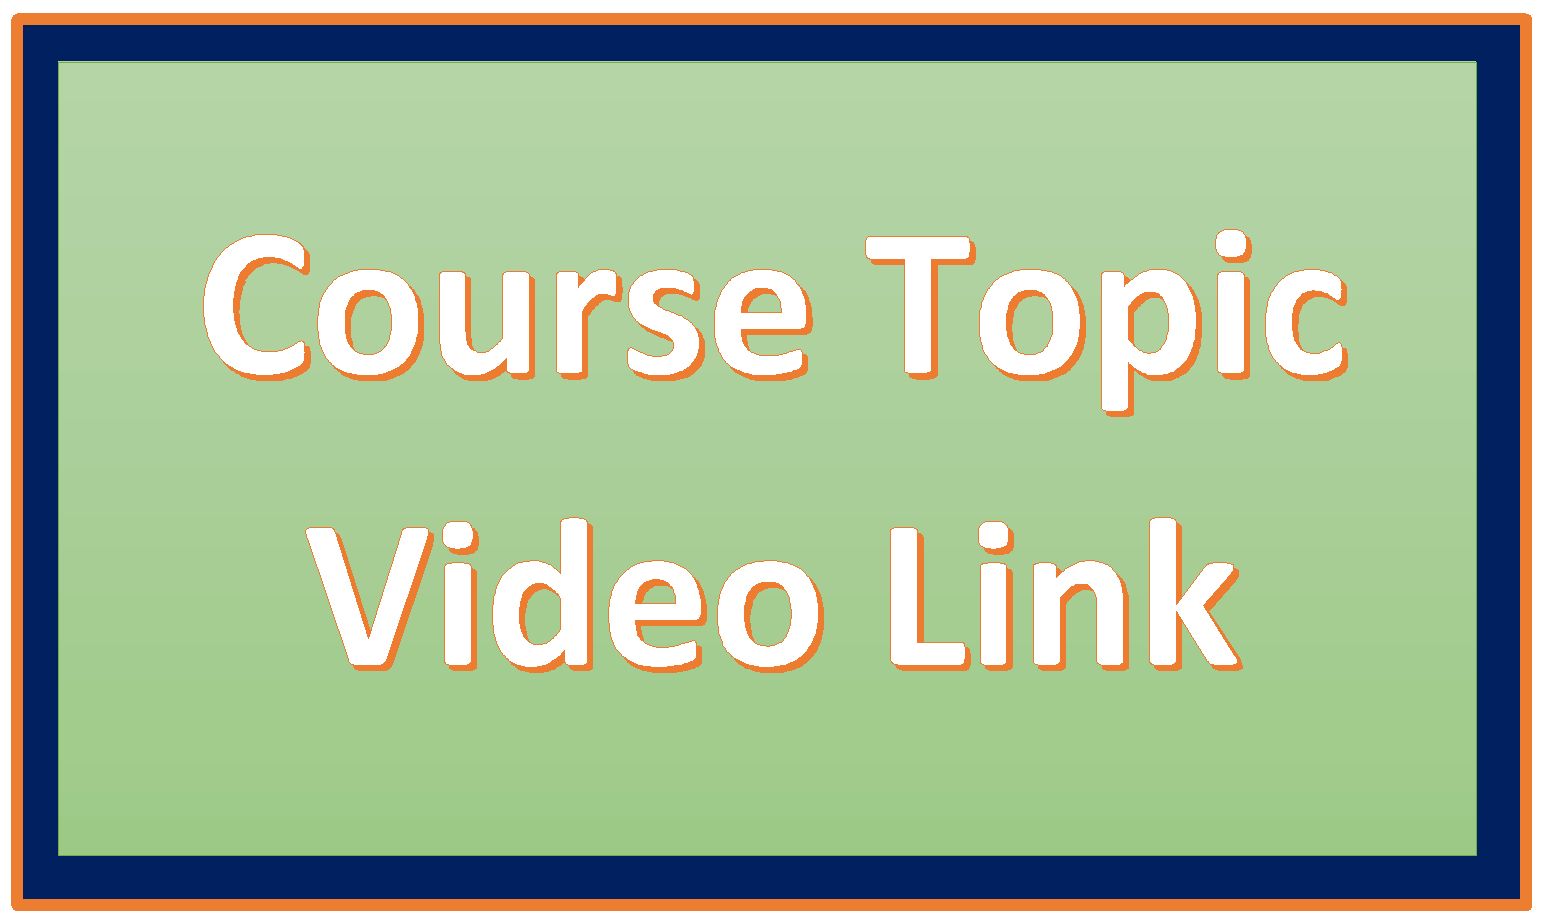 http://study.aisectonline.com/images/DDEO Course Topic Videos Link.png